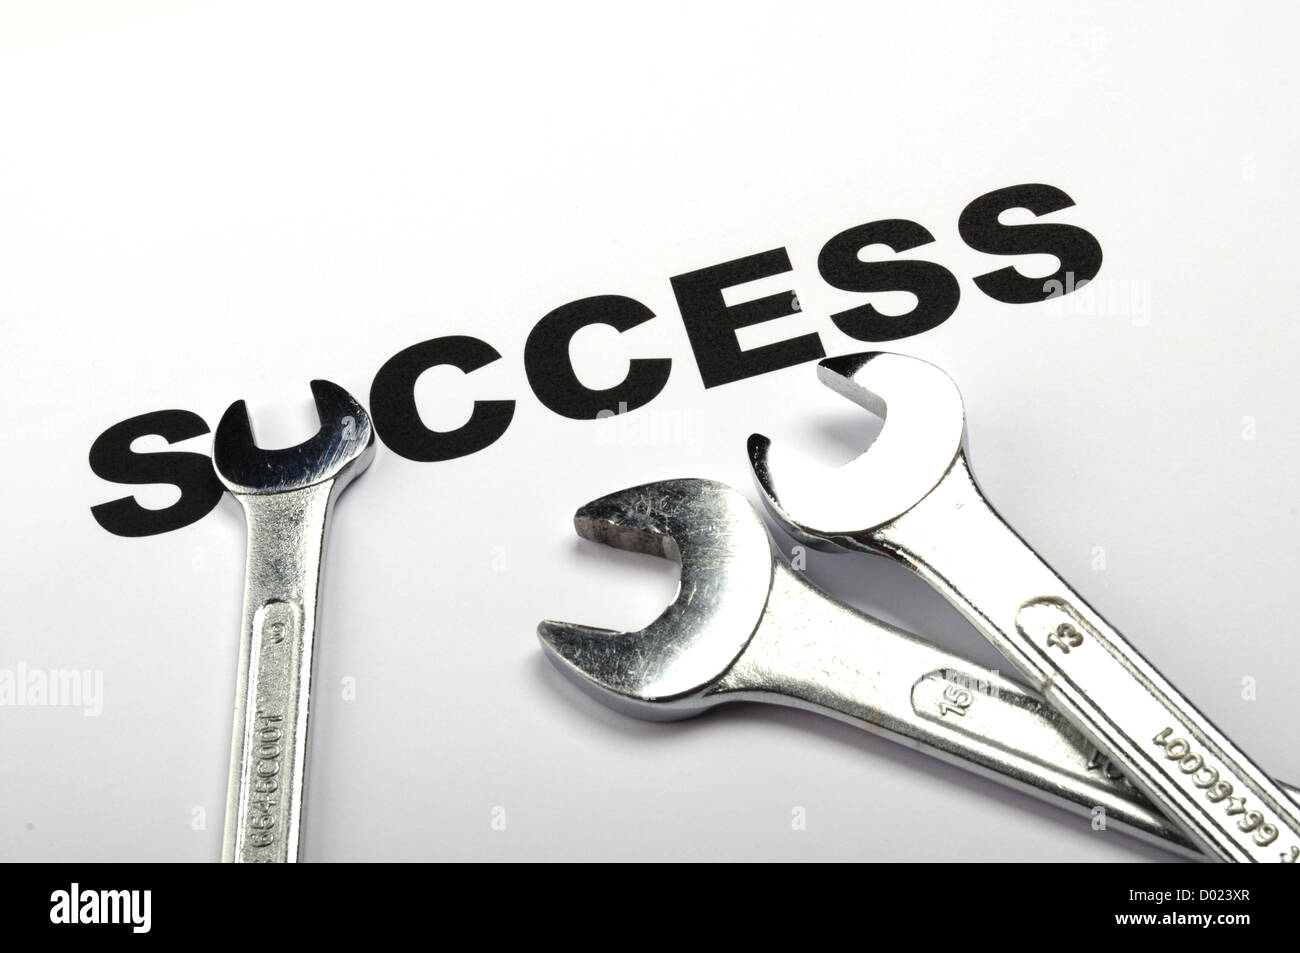 success concept with word and tool showing business growth Stock Photo